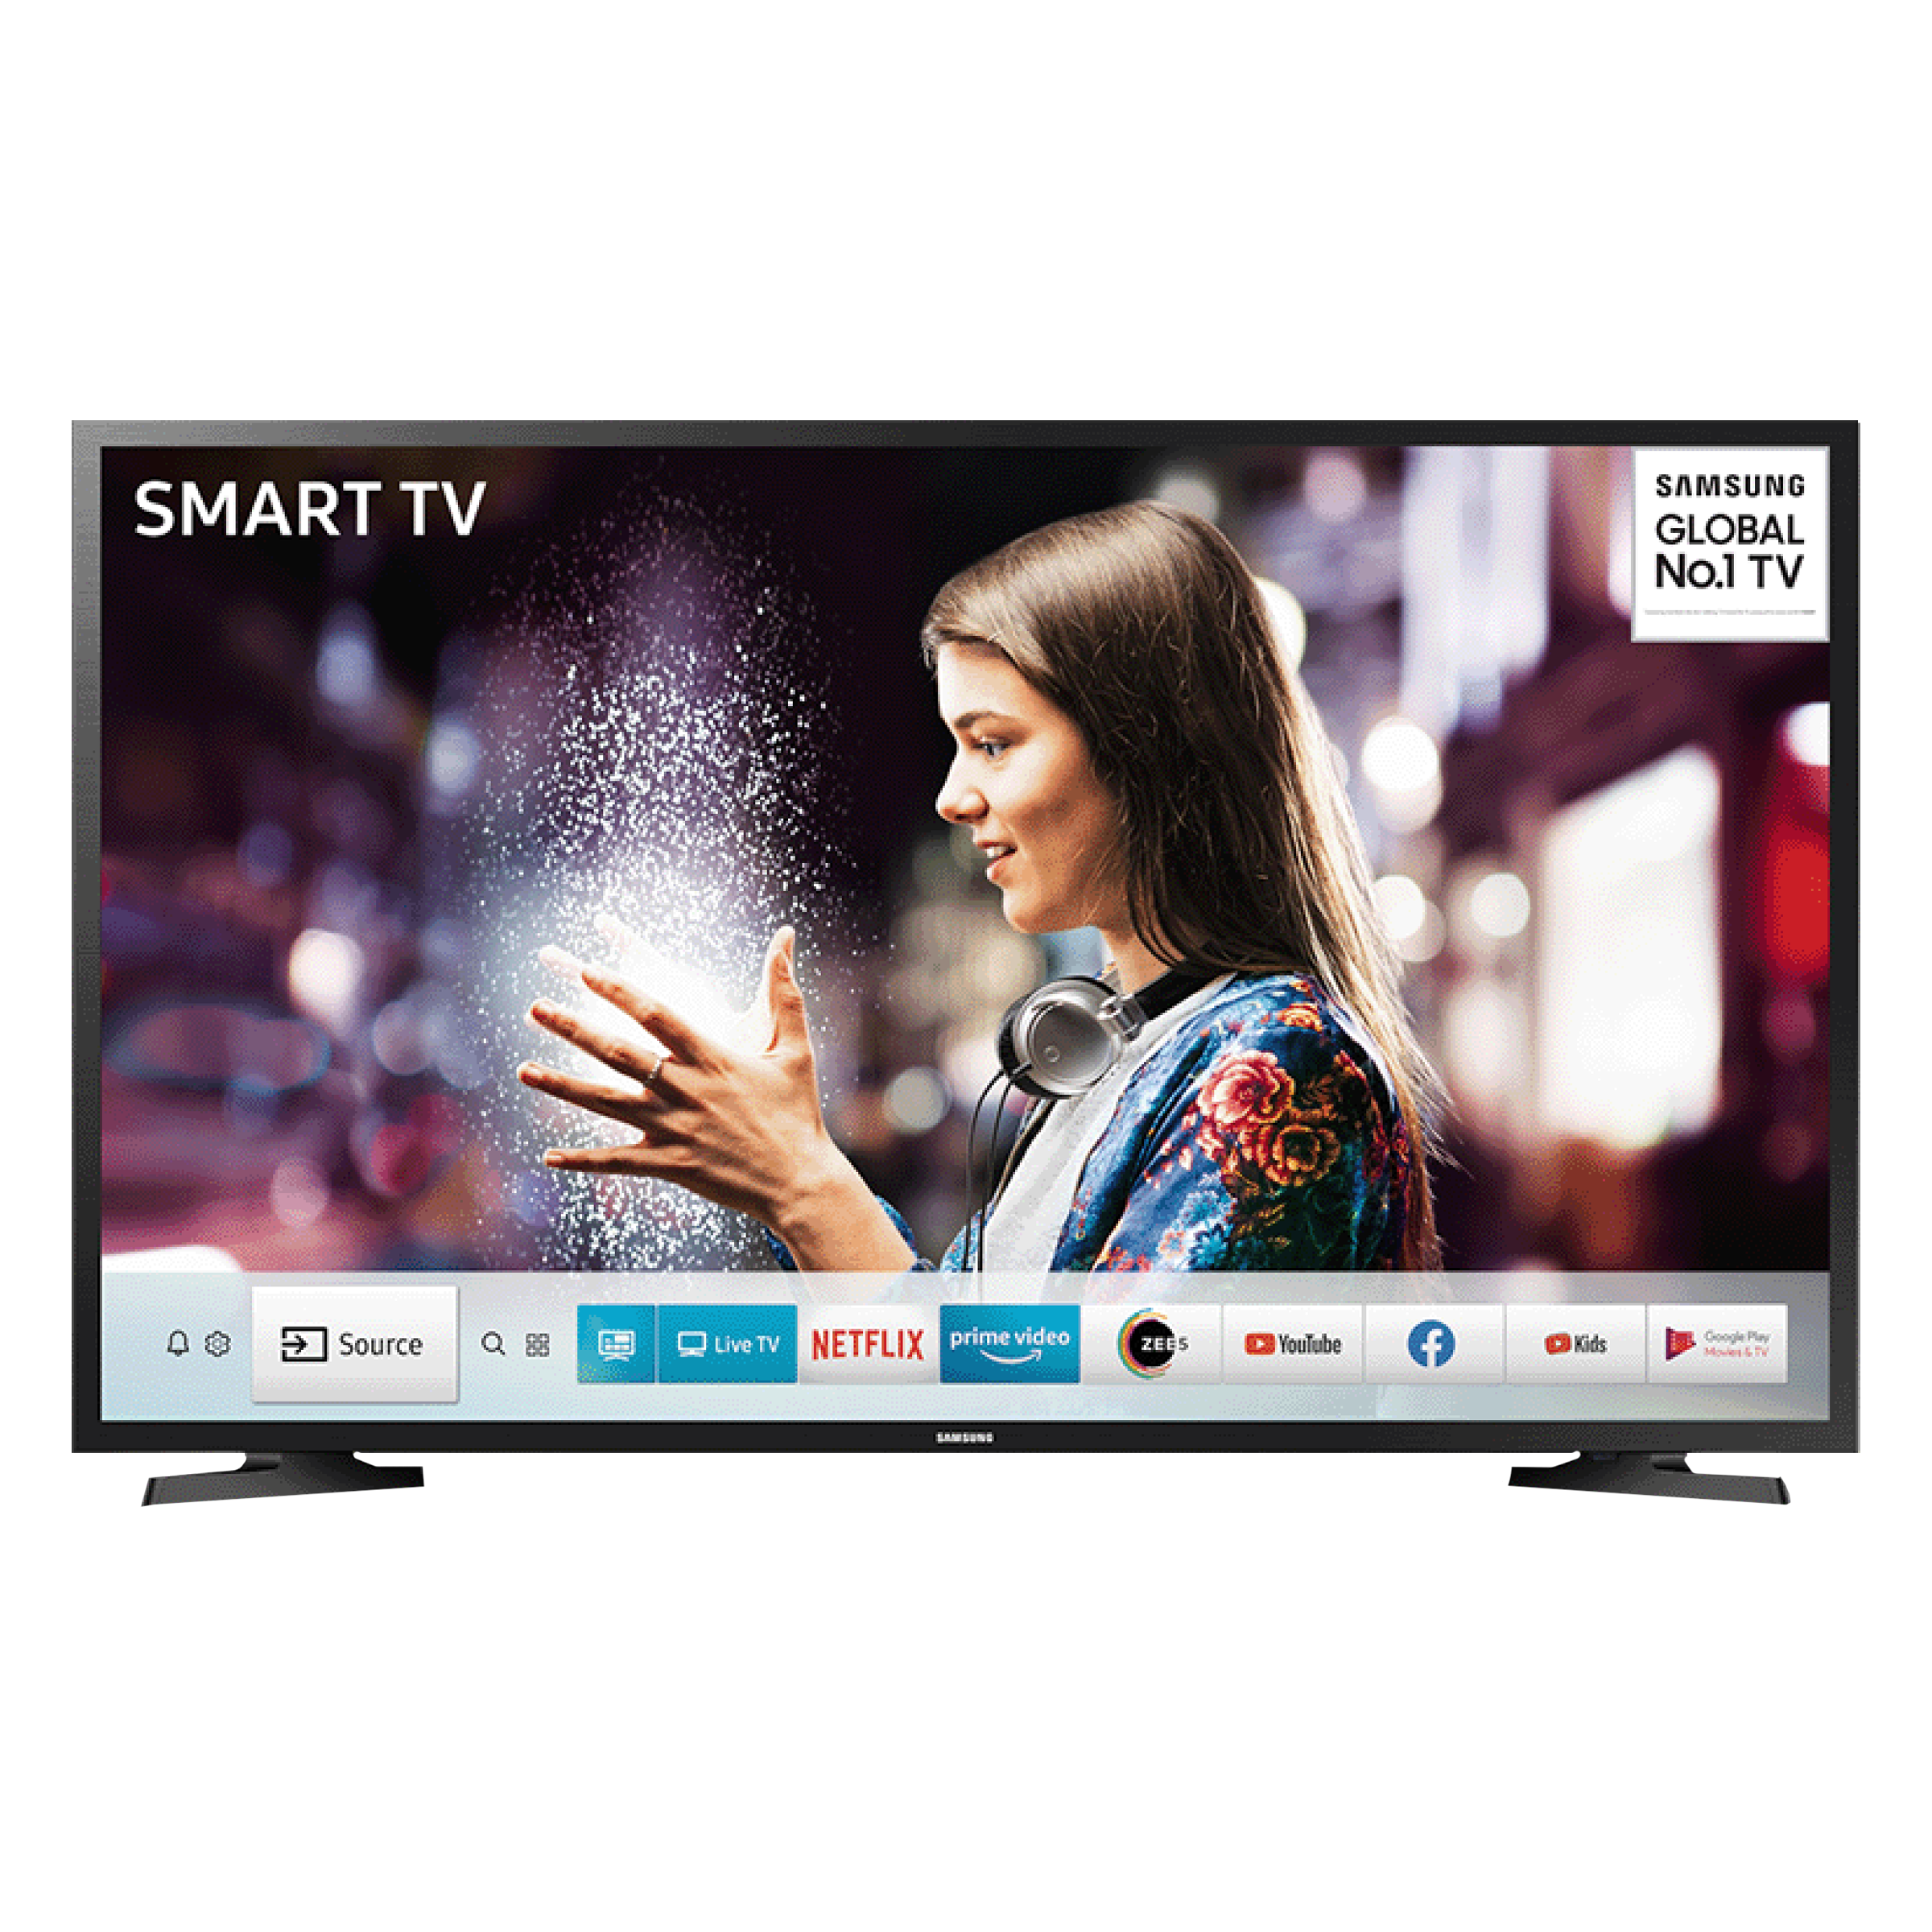 SAMSUNG Series 5 108 cm (43 inch) Full HD LED Tizen Smart TV with Alexa Compatibility_1